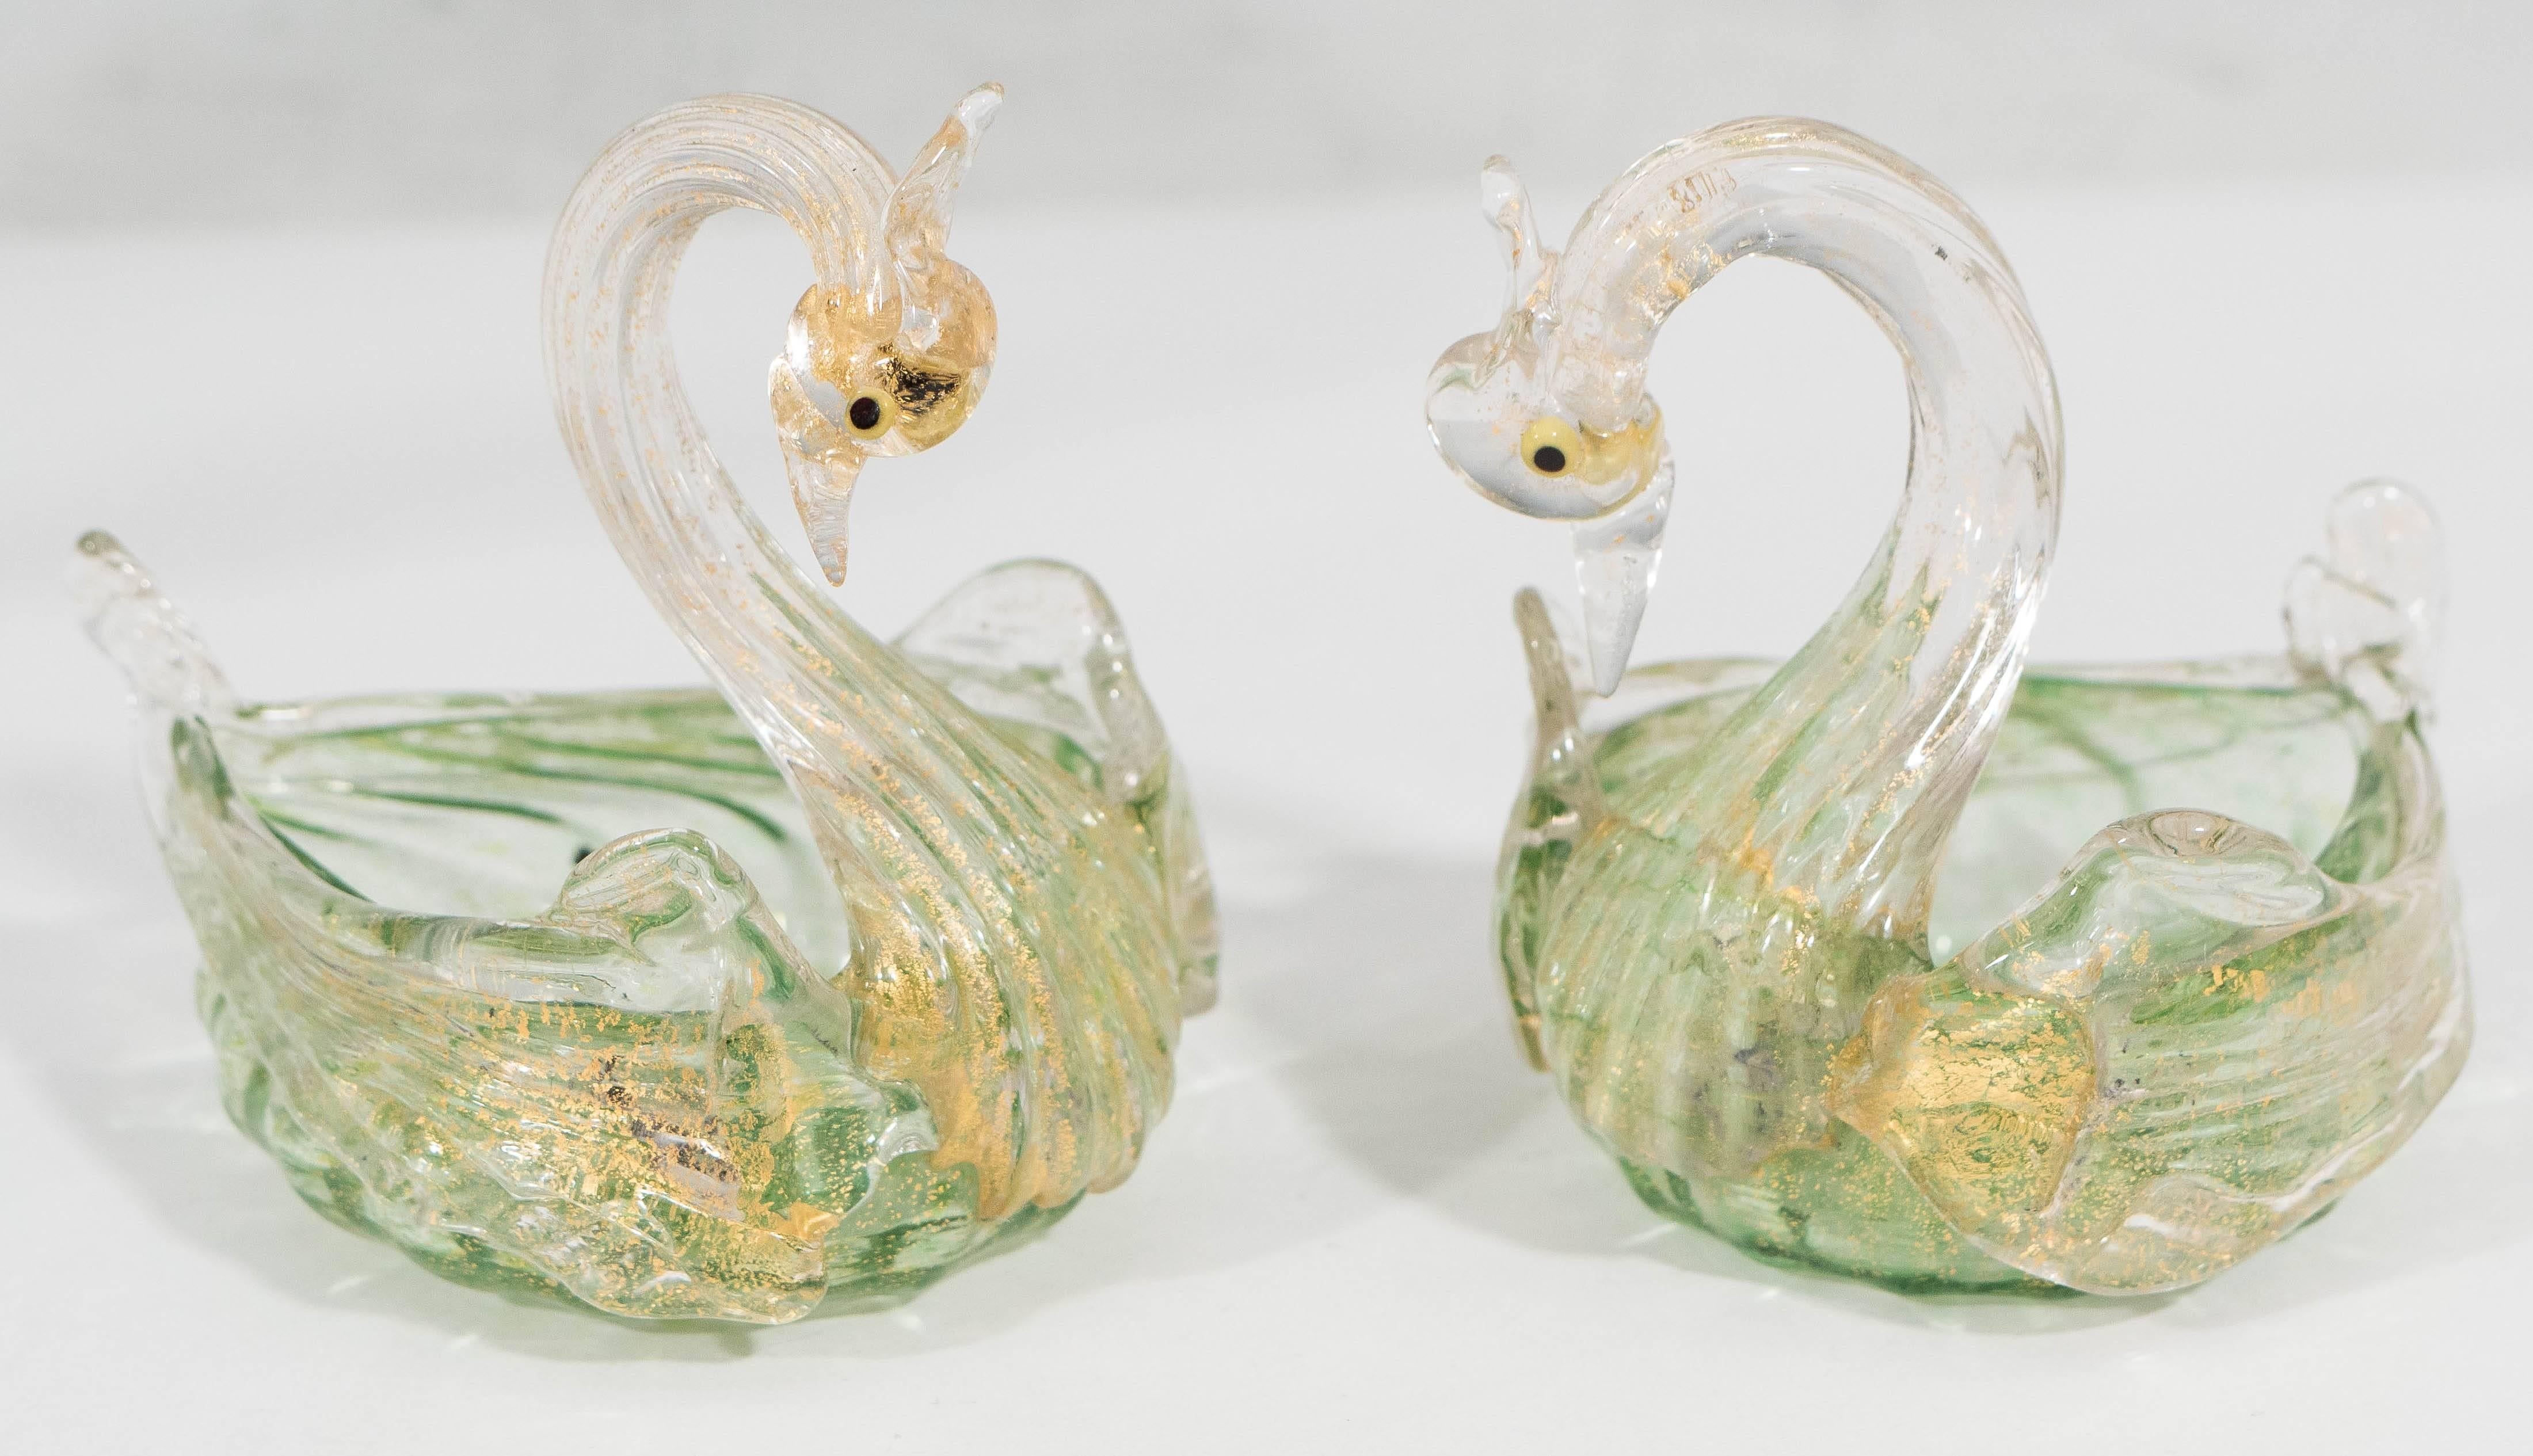 An fine arrangement of Salviati blown glass pieces, in varied tones of green and infused with gold flecks, including a raised bowl featuring a swan as stem, with ruffled swirled rim and round base, and a pair of matching, swan form salt cellar